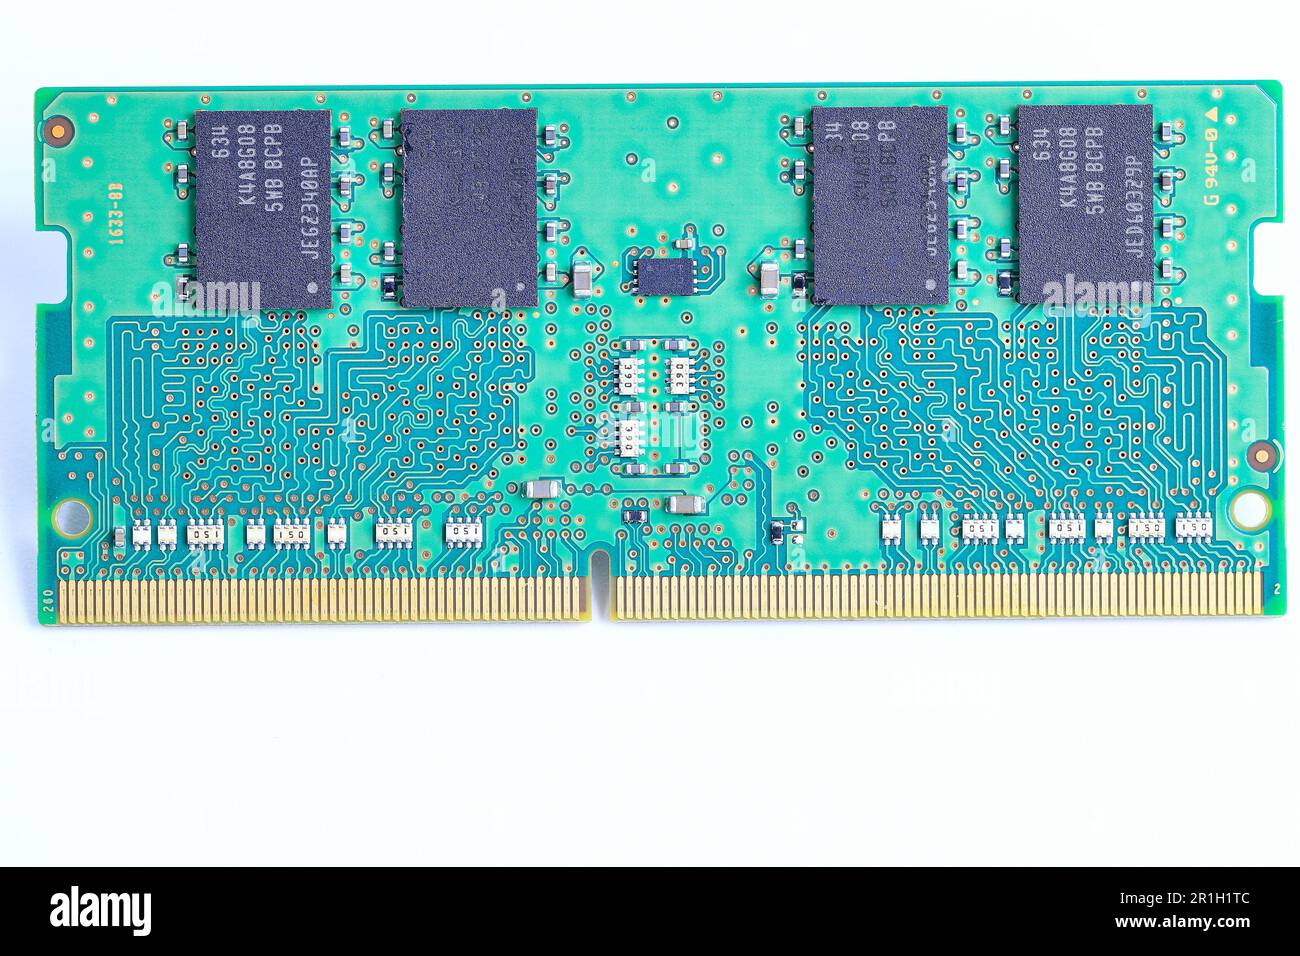 Computer notebook memory module type green color DDR3 4/8 chip isolate on white background. Stock Photo